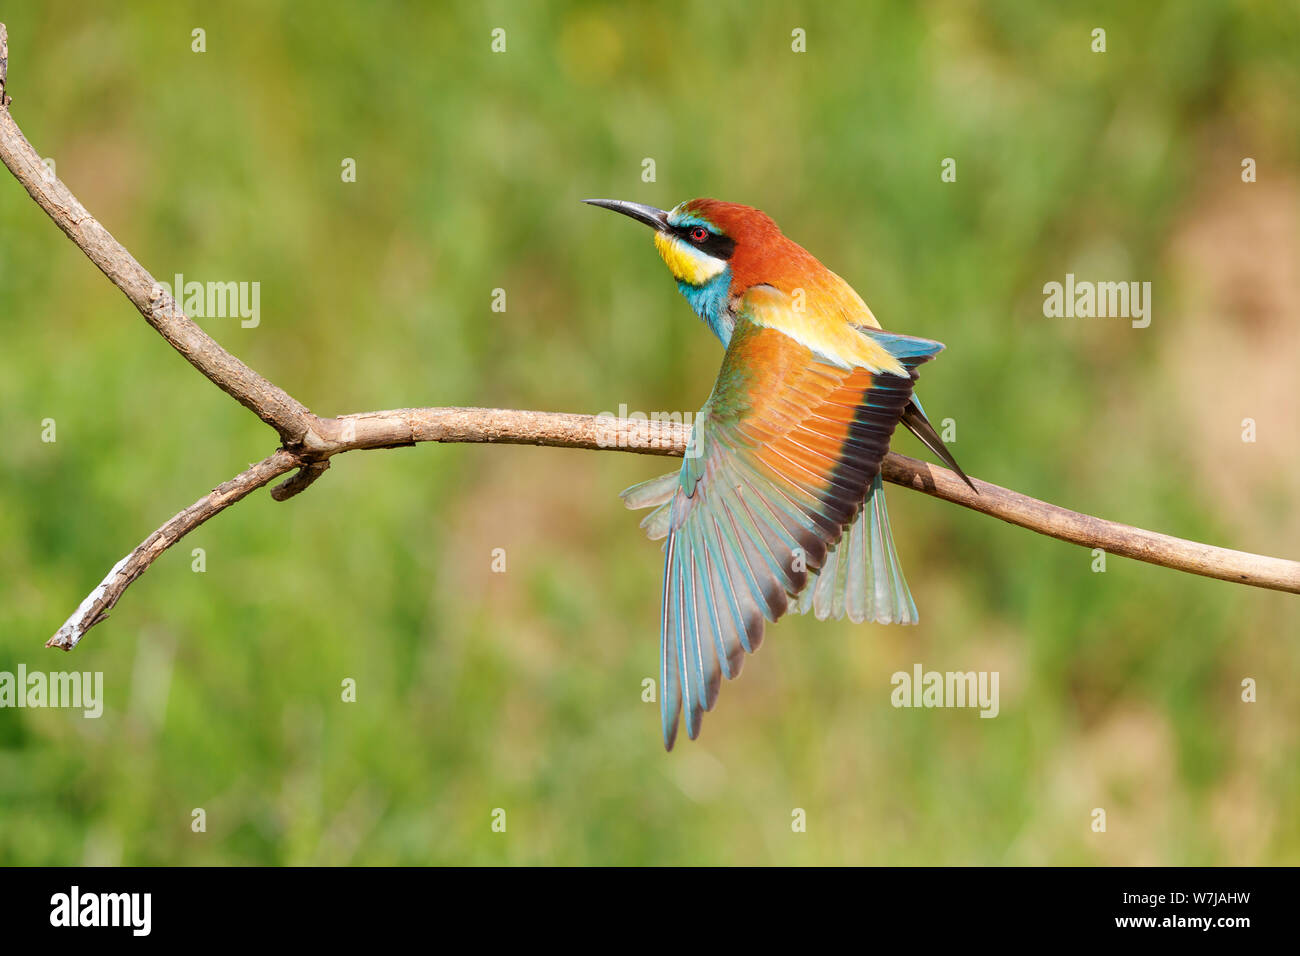 A European bee-eater (Merops apiaster) perches on a branch and spreads its wings, Koros-Maros National Park, Bekes County, Hungary Stock Photo